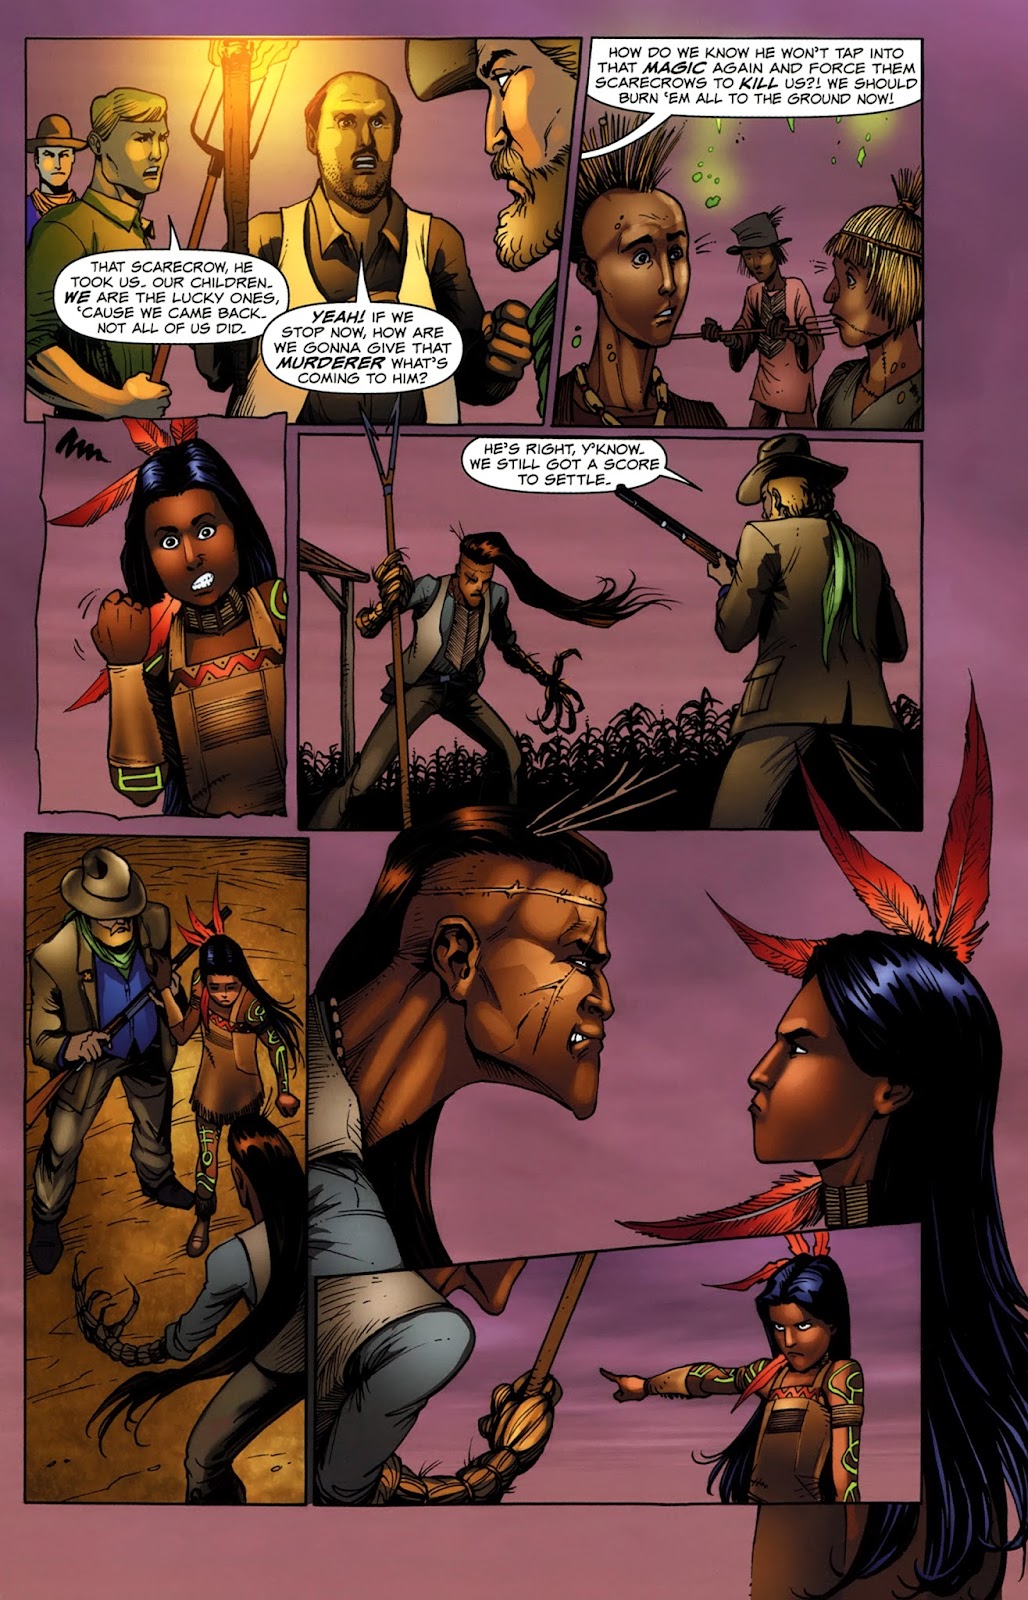 Legends of Oz: The Scarecrow issue 2 - Page 16